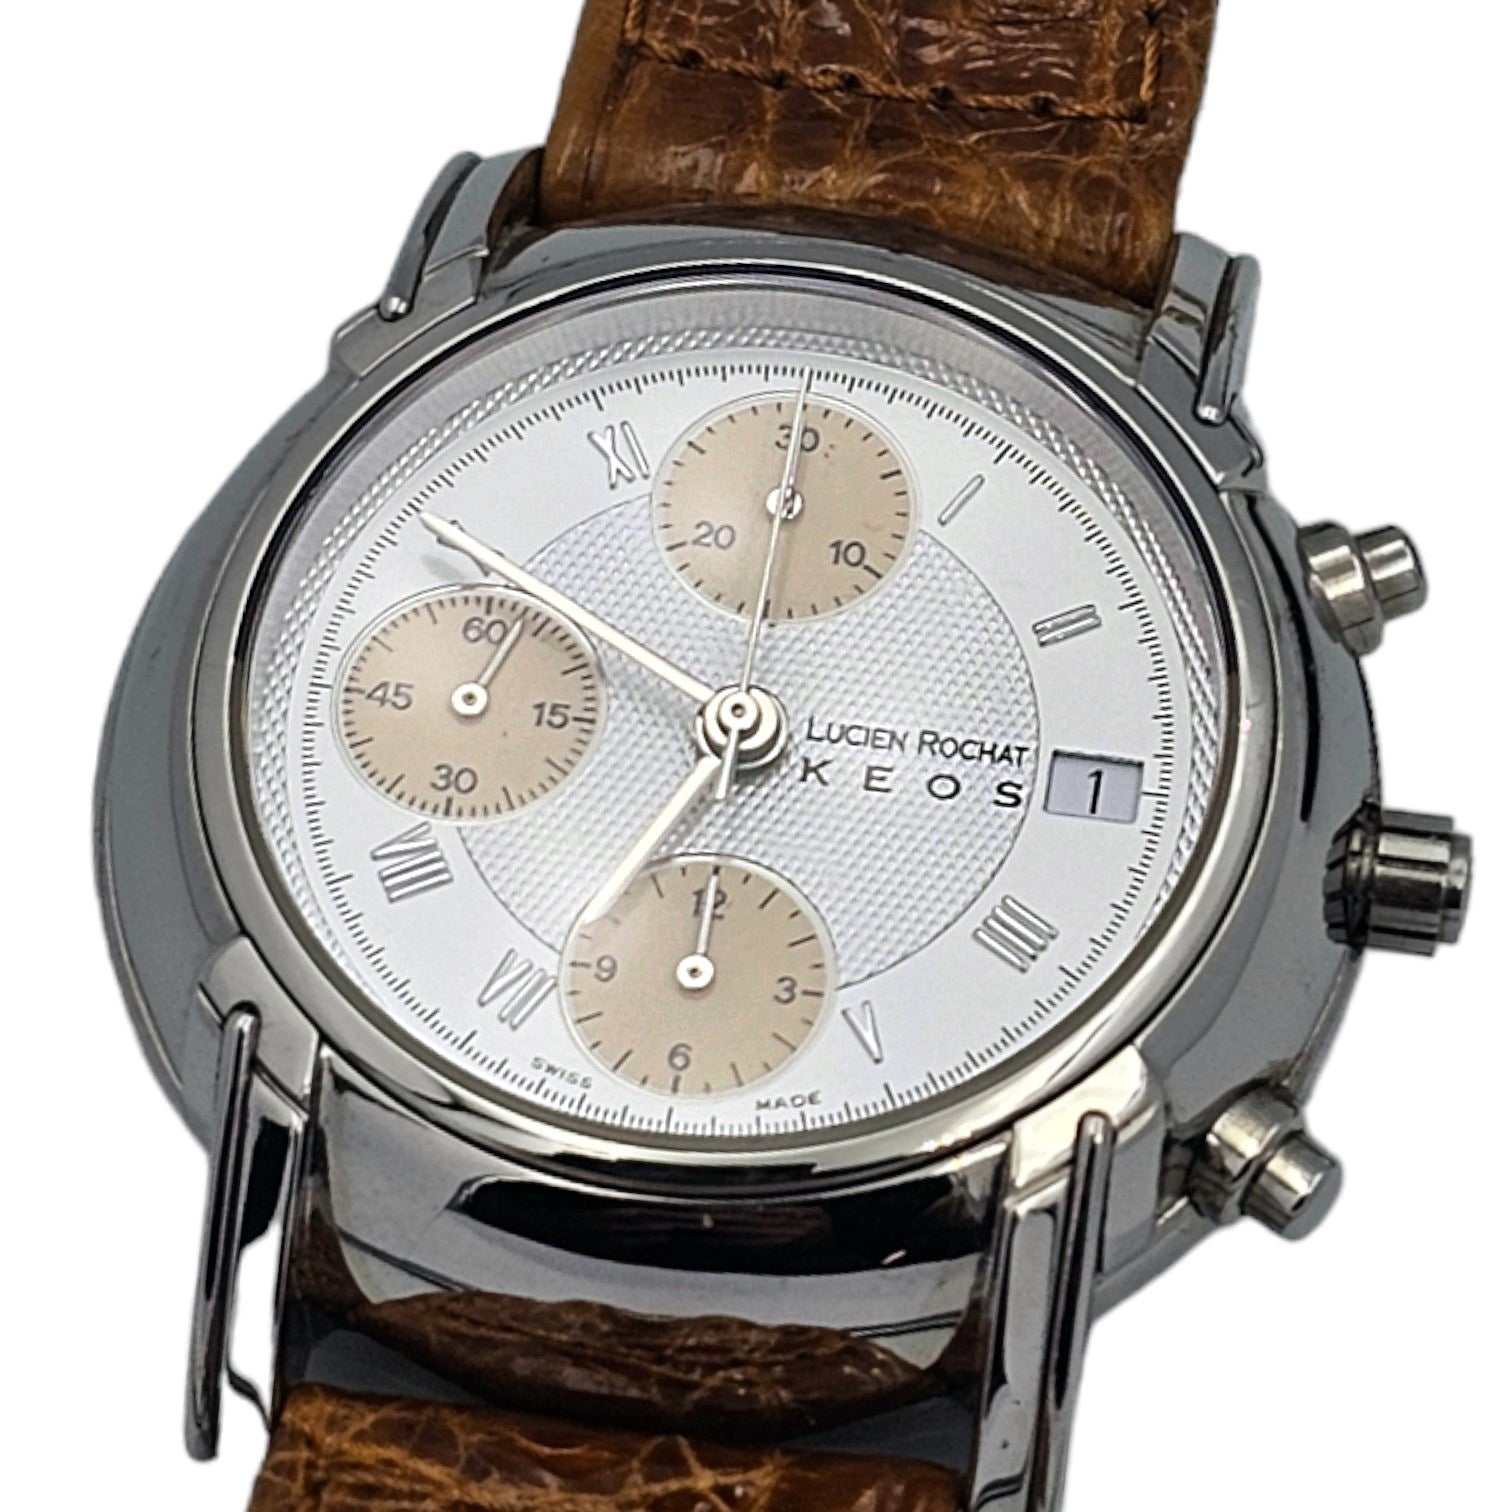 Lucien Rochat Keos Chrono Ref. 0421621015 - ON6340